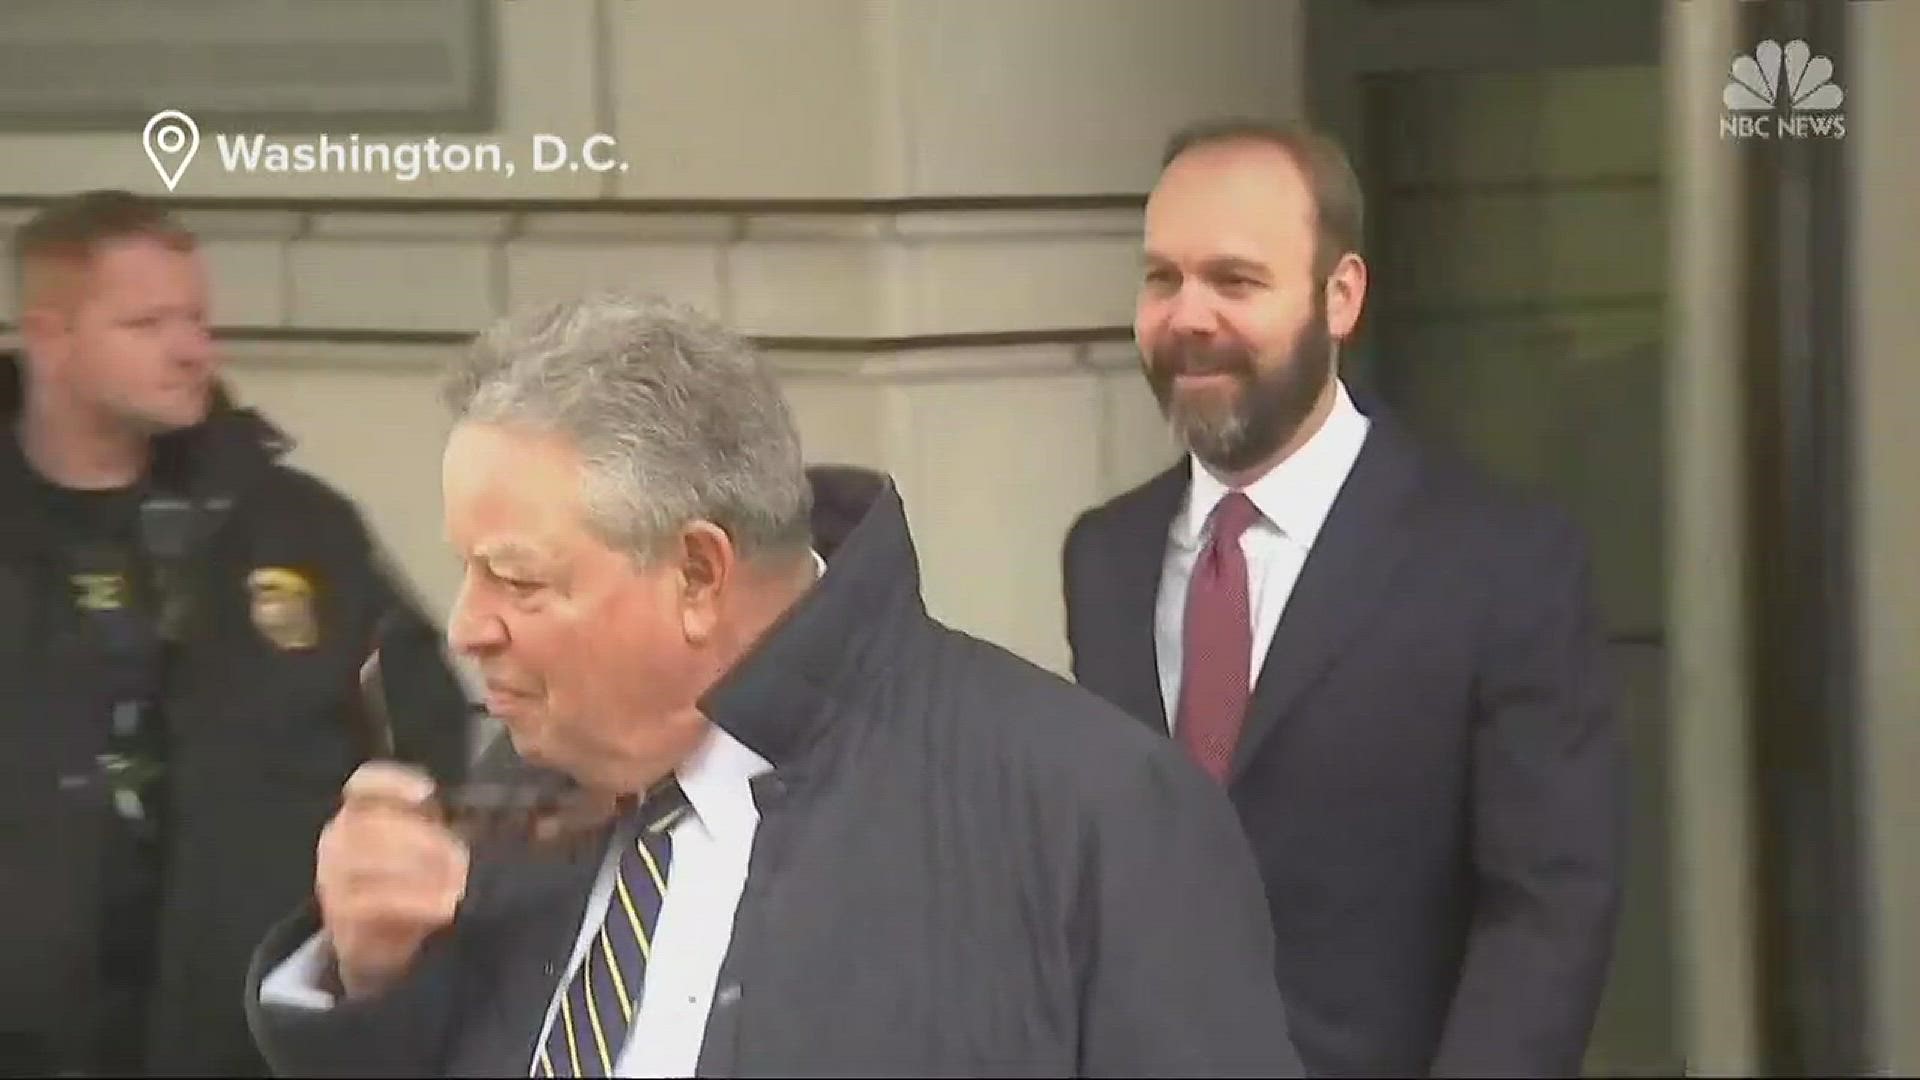 Former Trump campaign advisor Rick Gates pleads guilty to conspiracy against the United States and lying to federal agents as part of special counsel Robert Mueller's Russia probe.  NBC's Blayne Alexander reports.